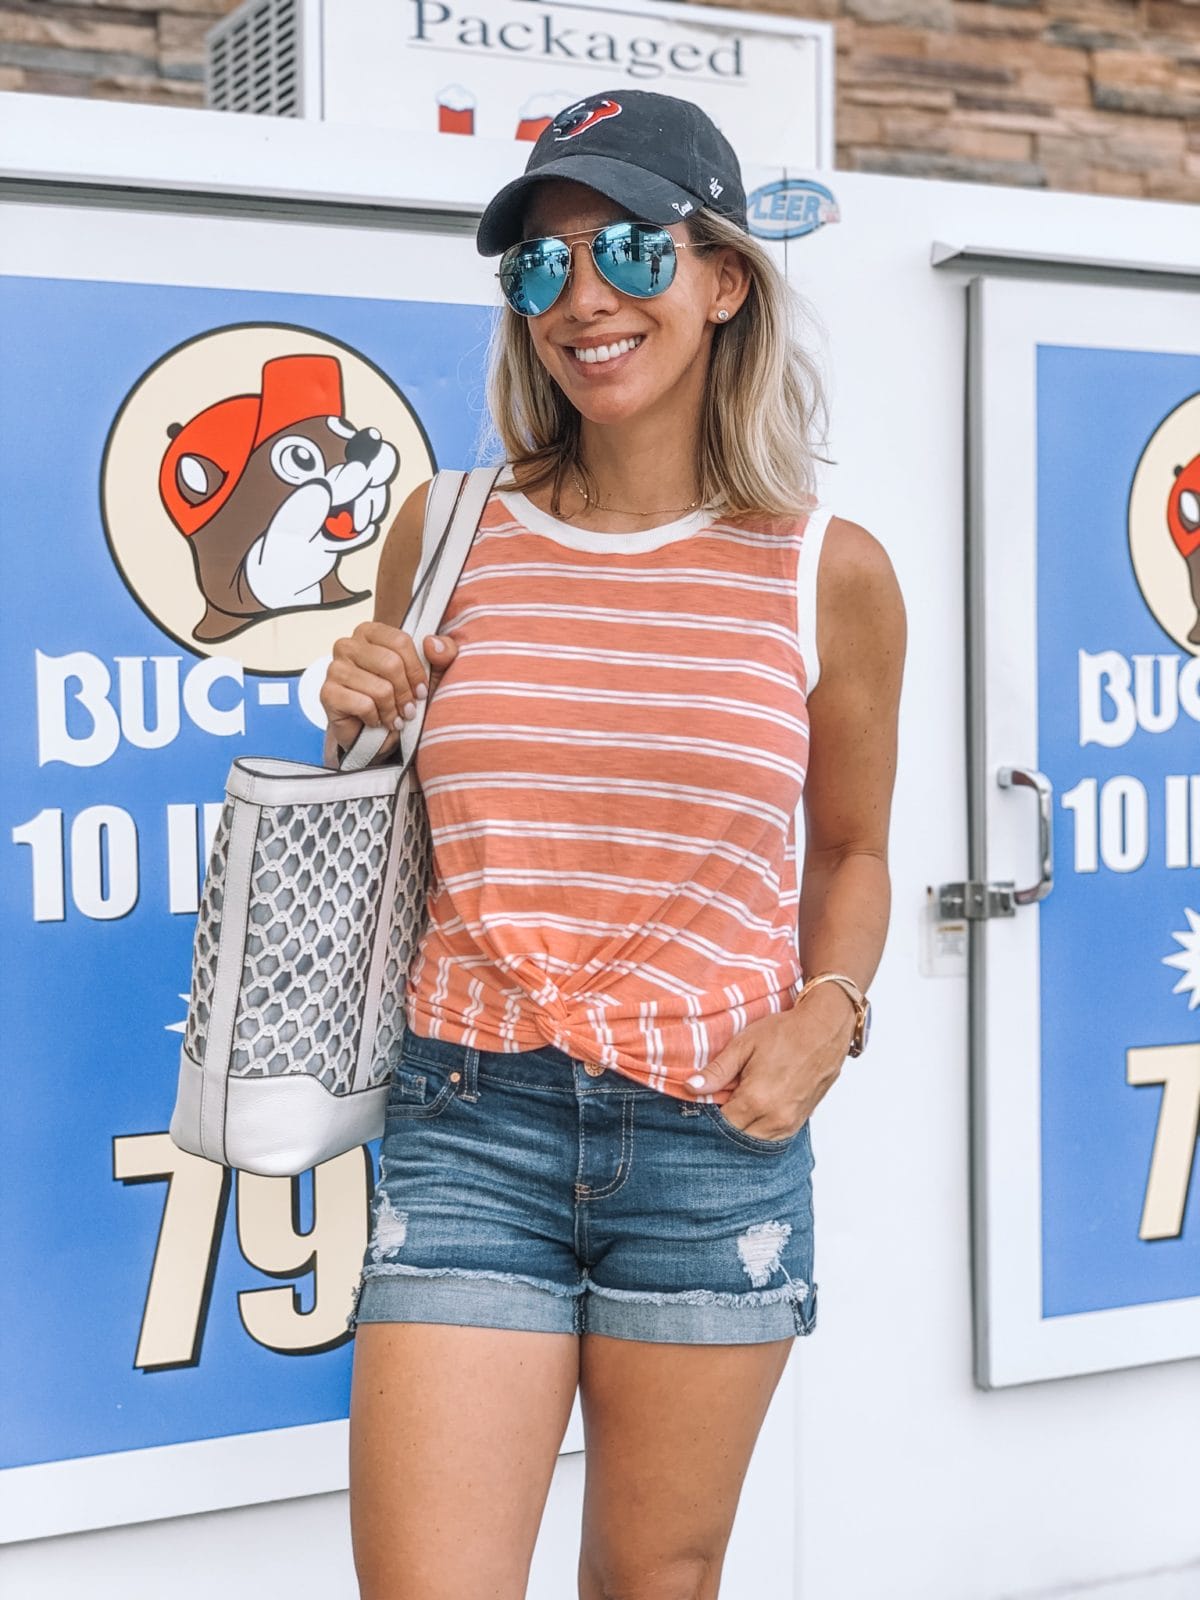 48 Hours in Galveston - stripe shirt with jean shorts